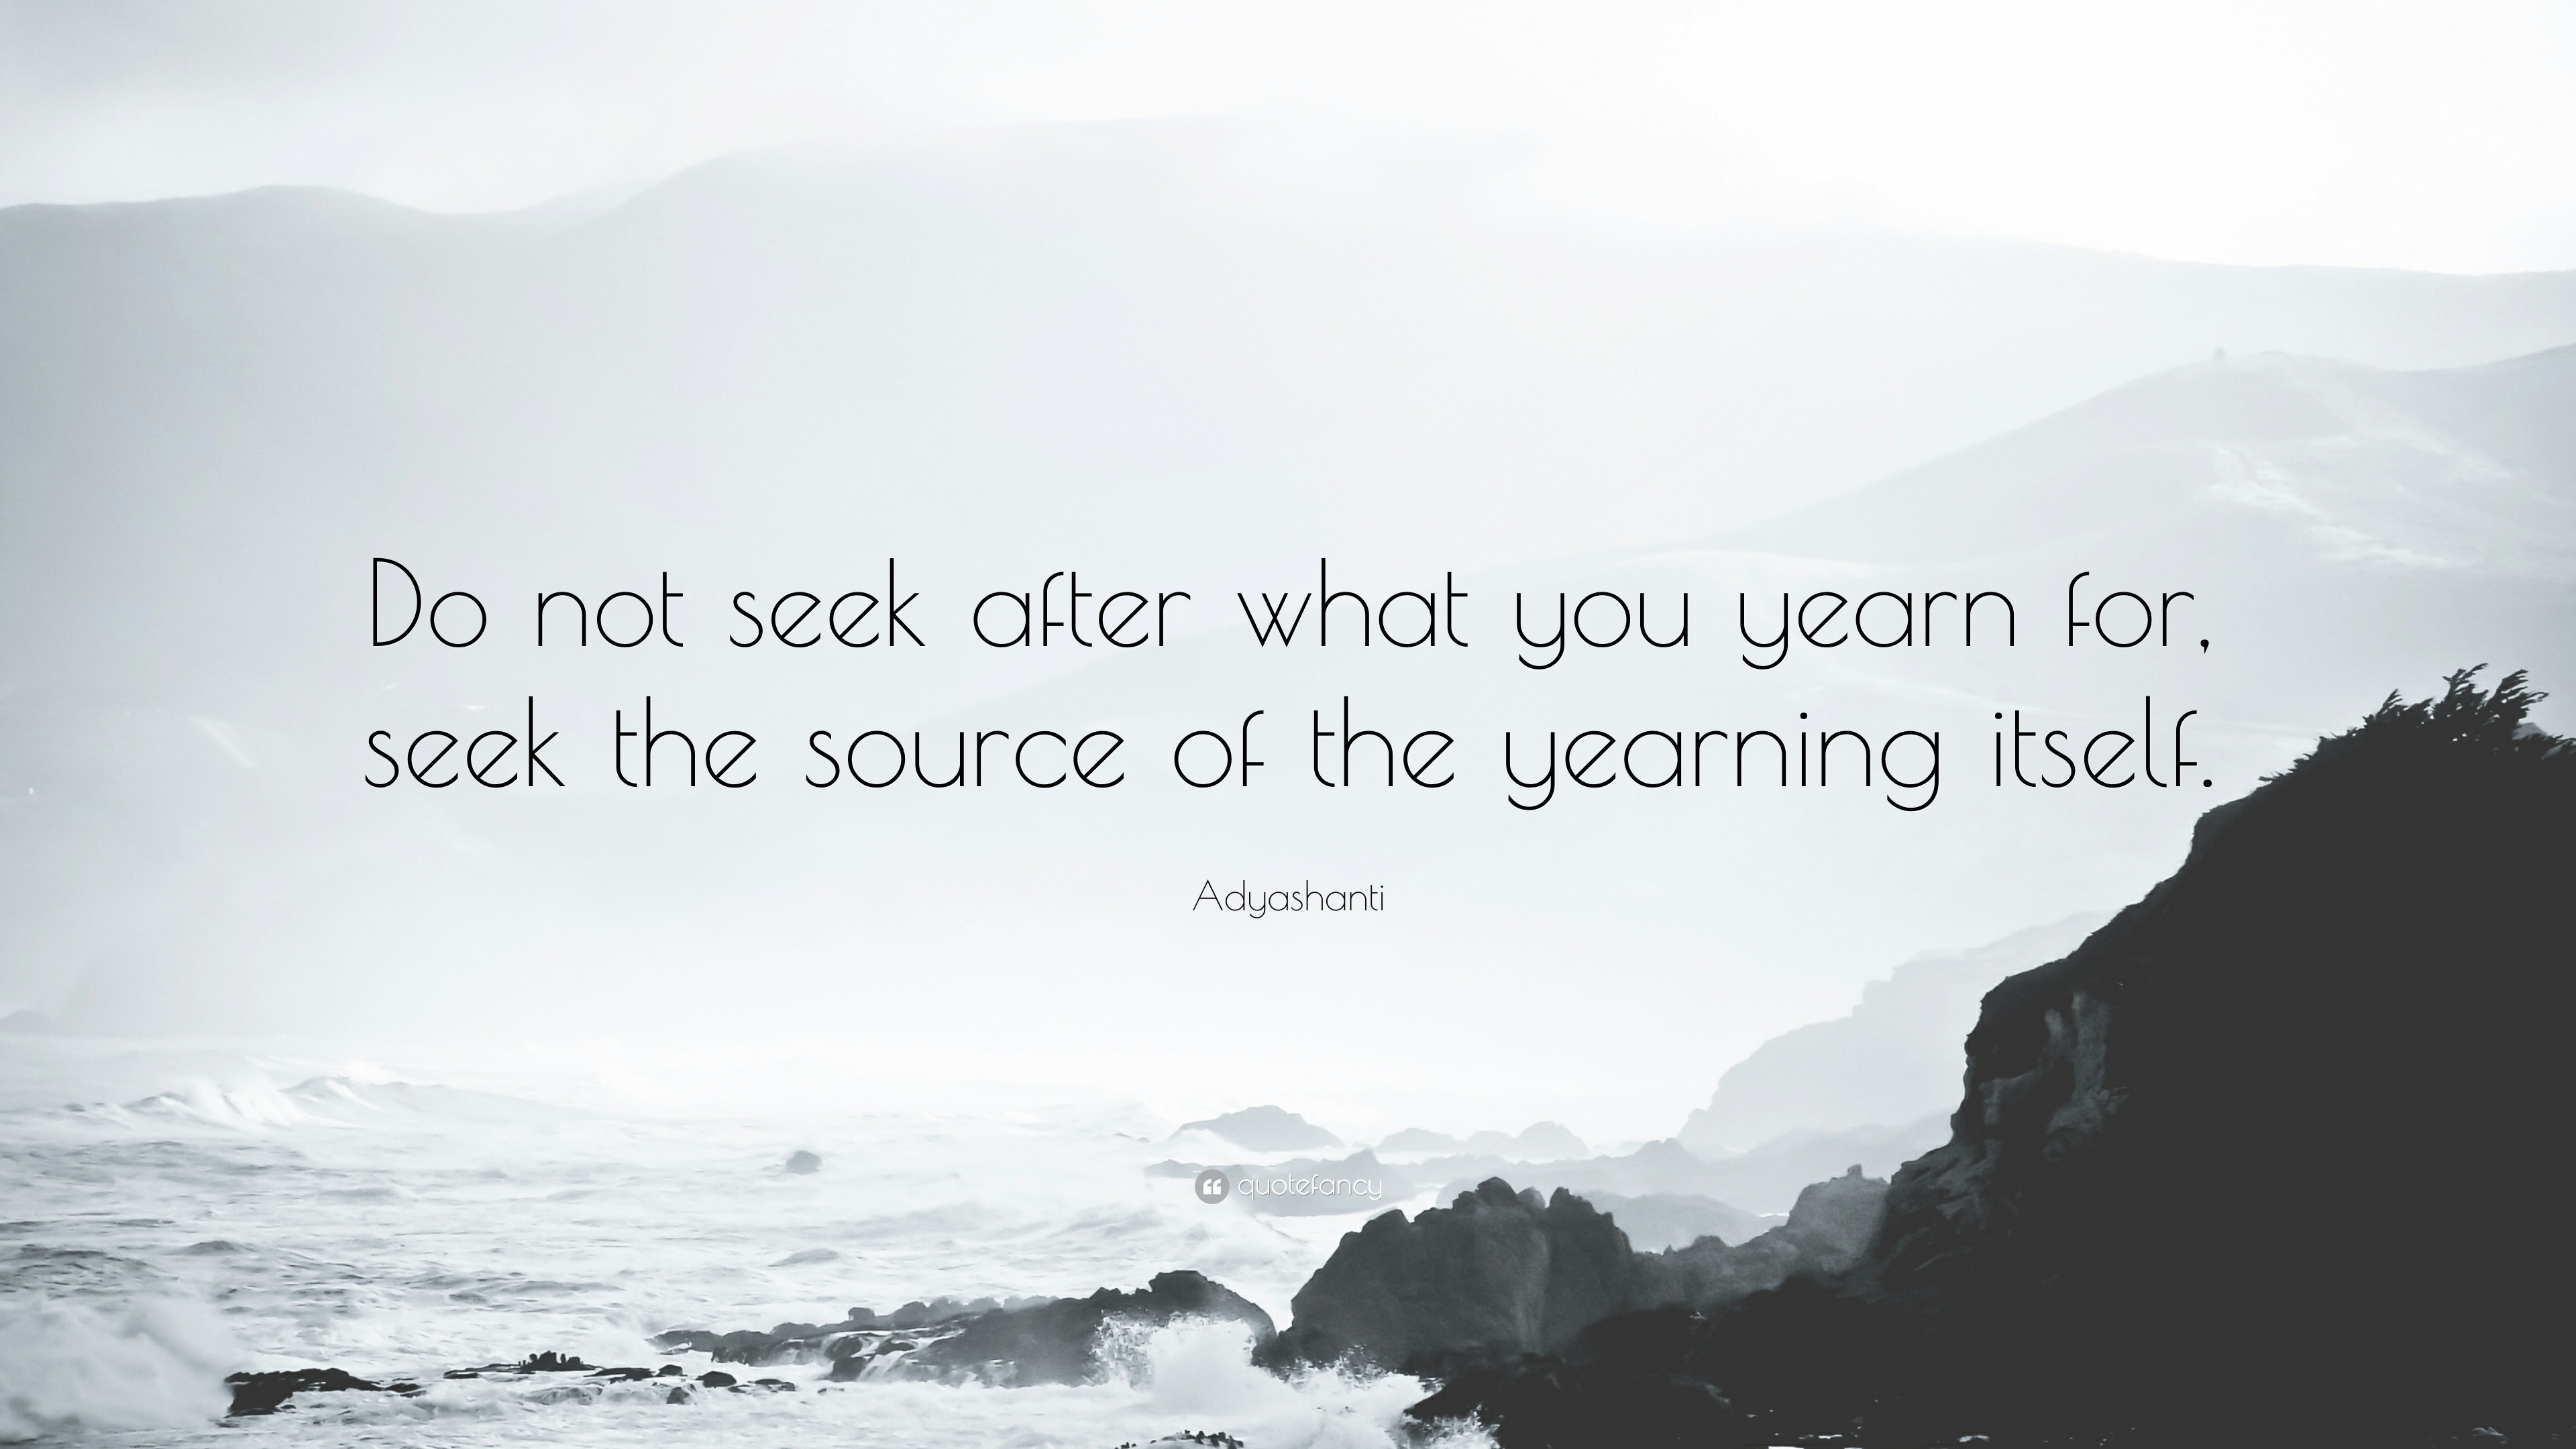 Adyashanti Quote: “Do not seek after what you yearn for, seek the source of  the yearning